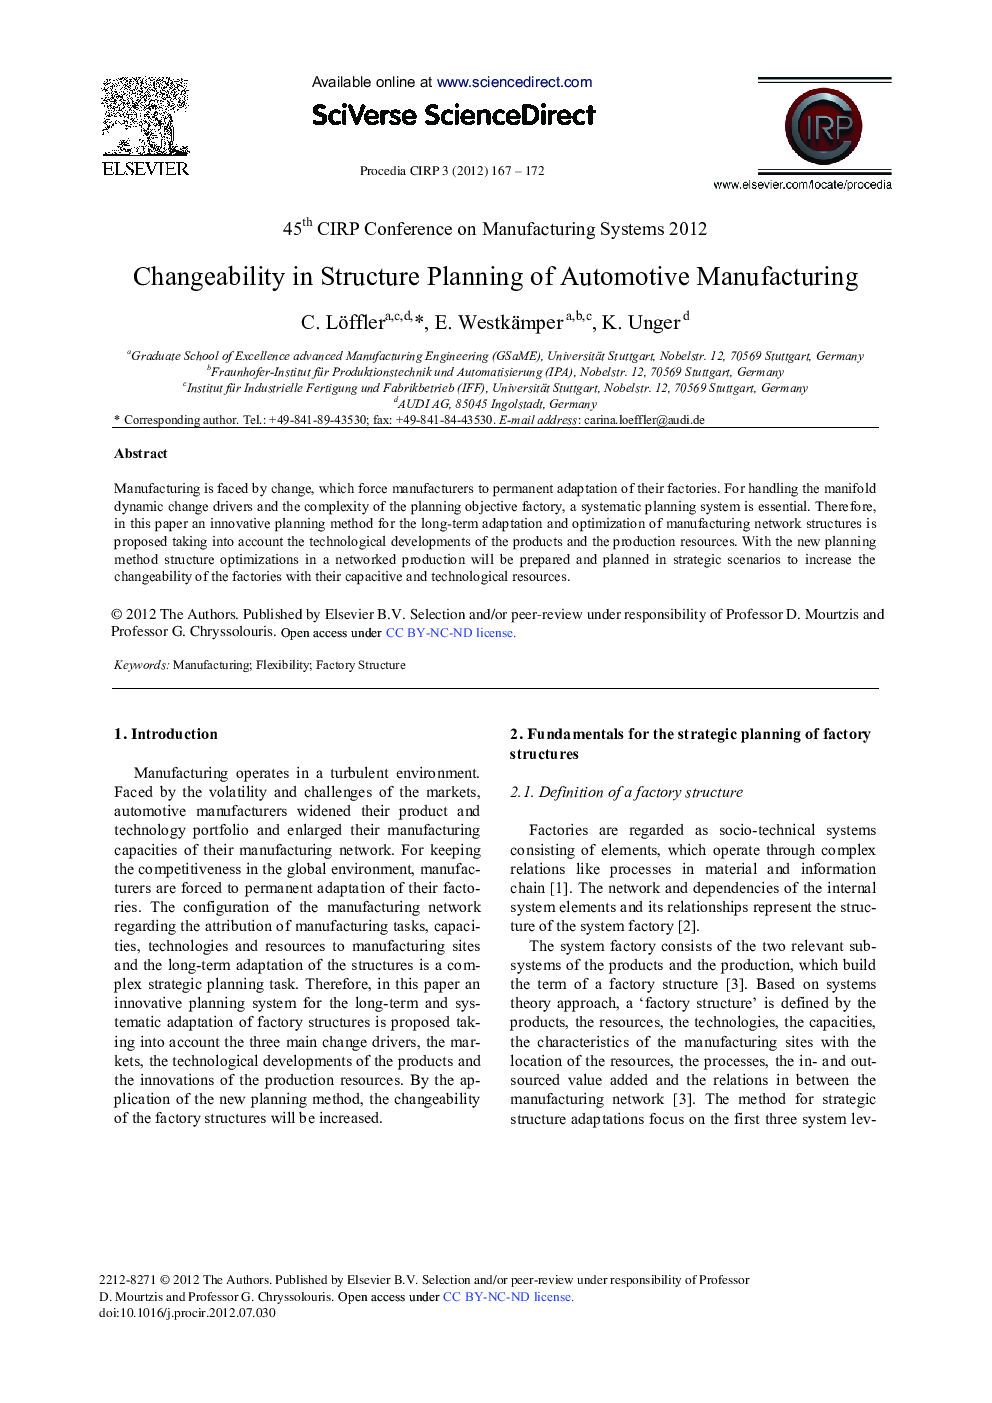 Changeability in Structure Planning of Automotive Manufacturing